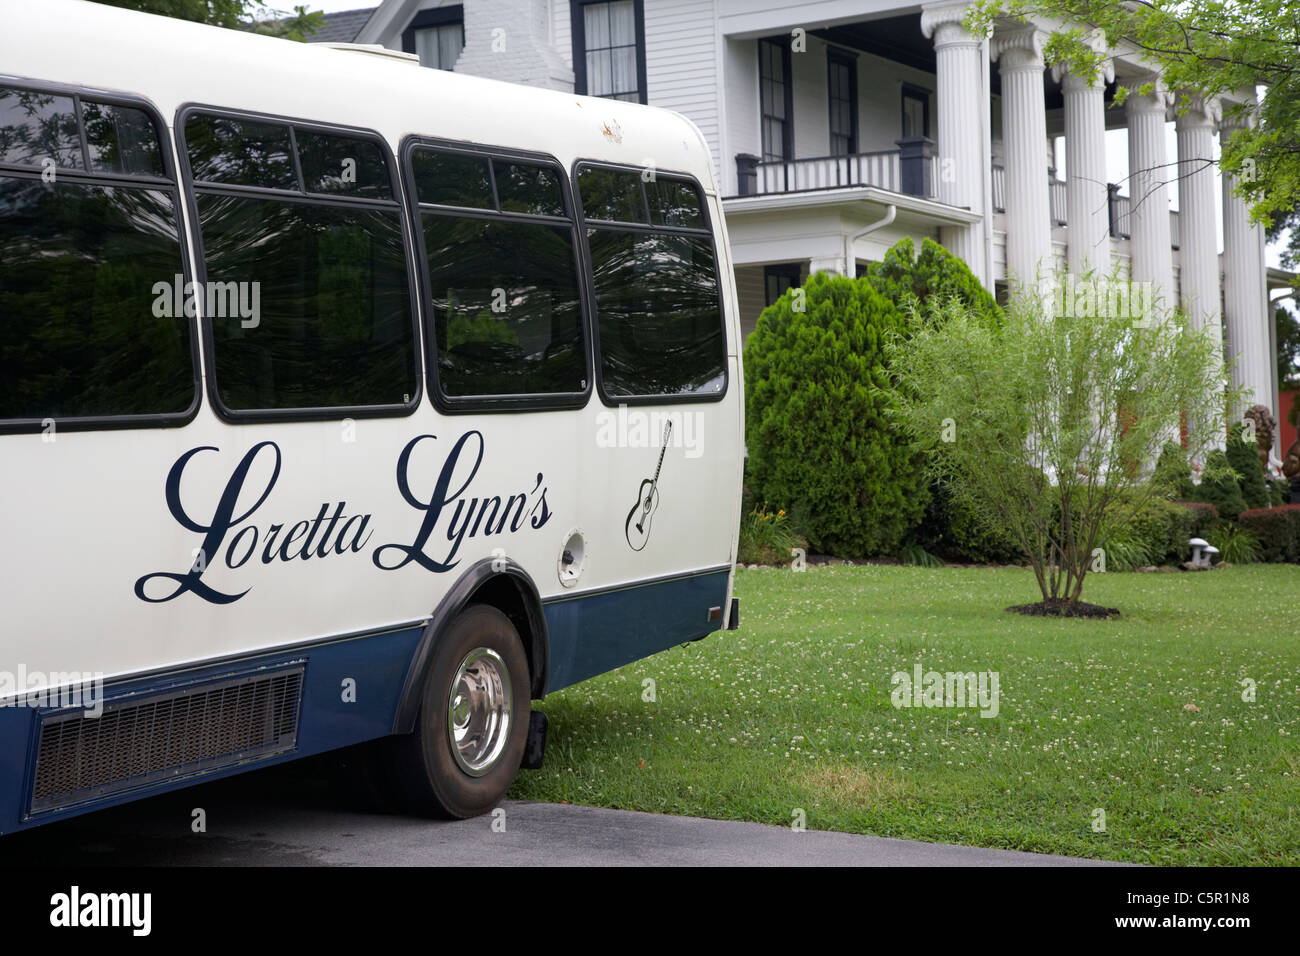 tourists guided tour bus outside plantation house on loretta lynn dude ranch hurricane mills tennessee usa Stock Photo